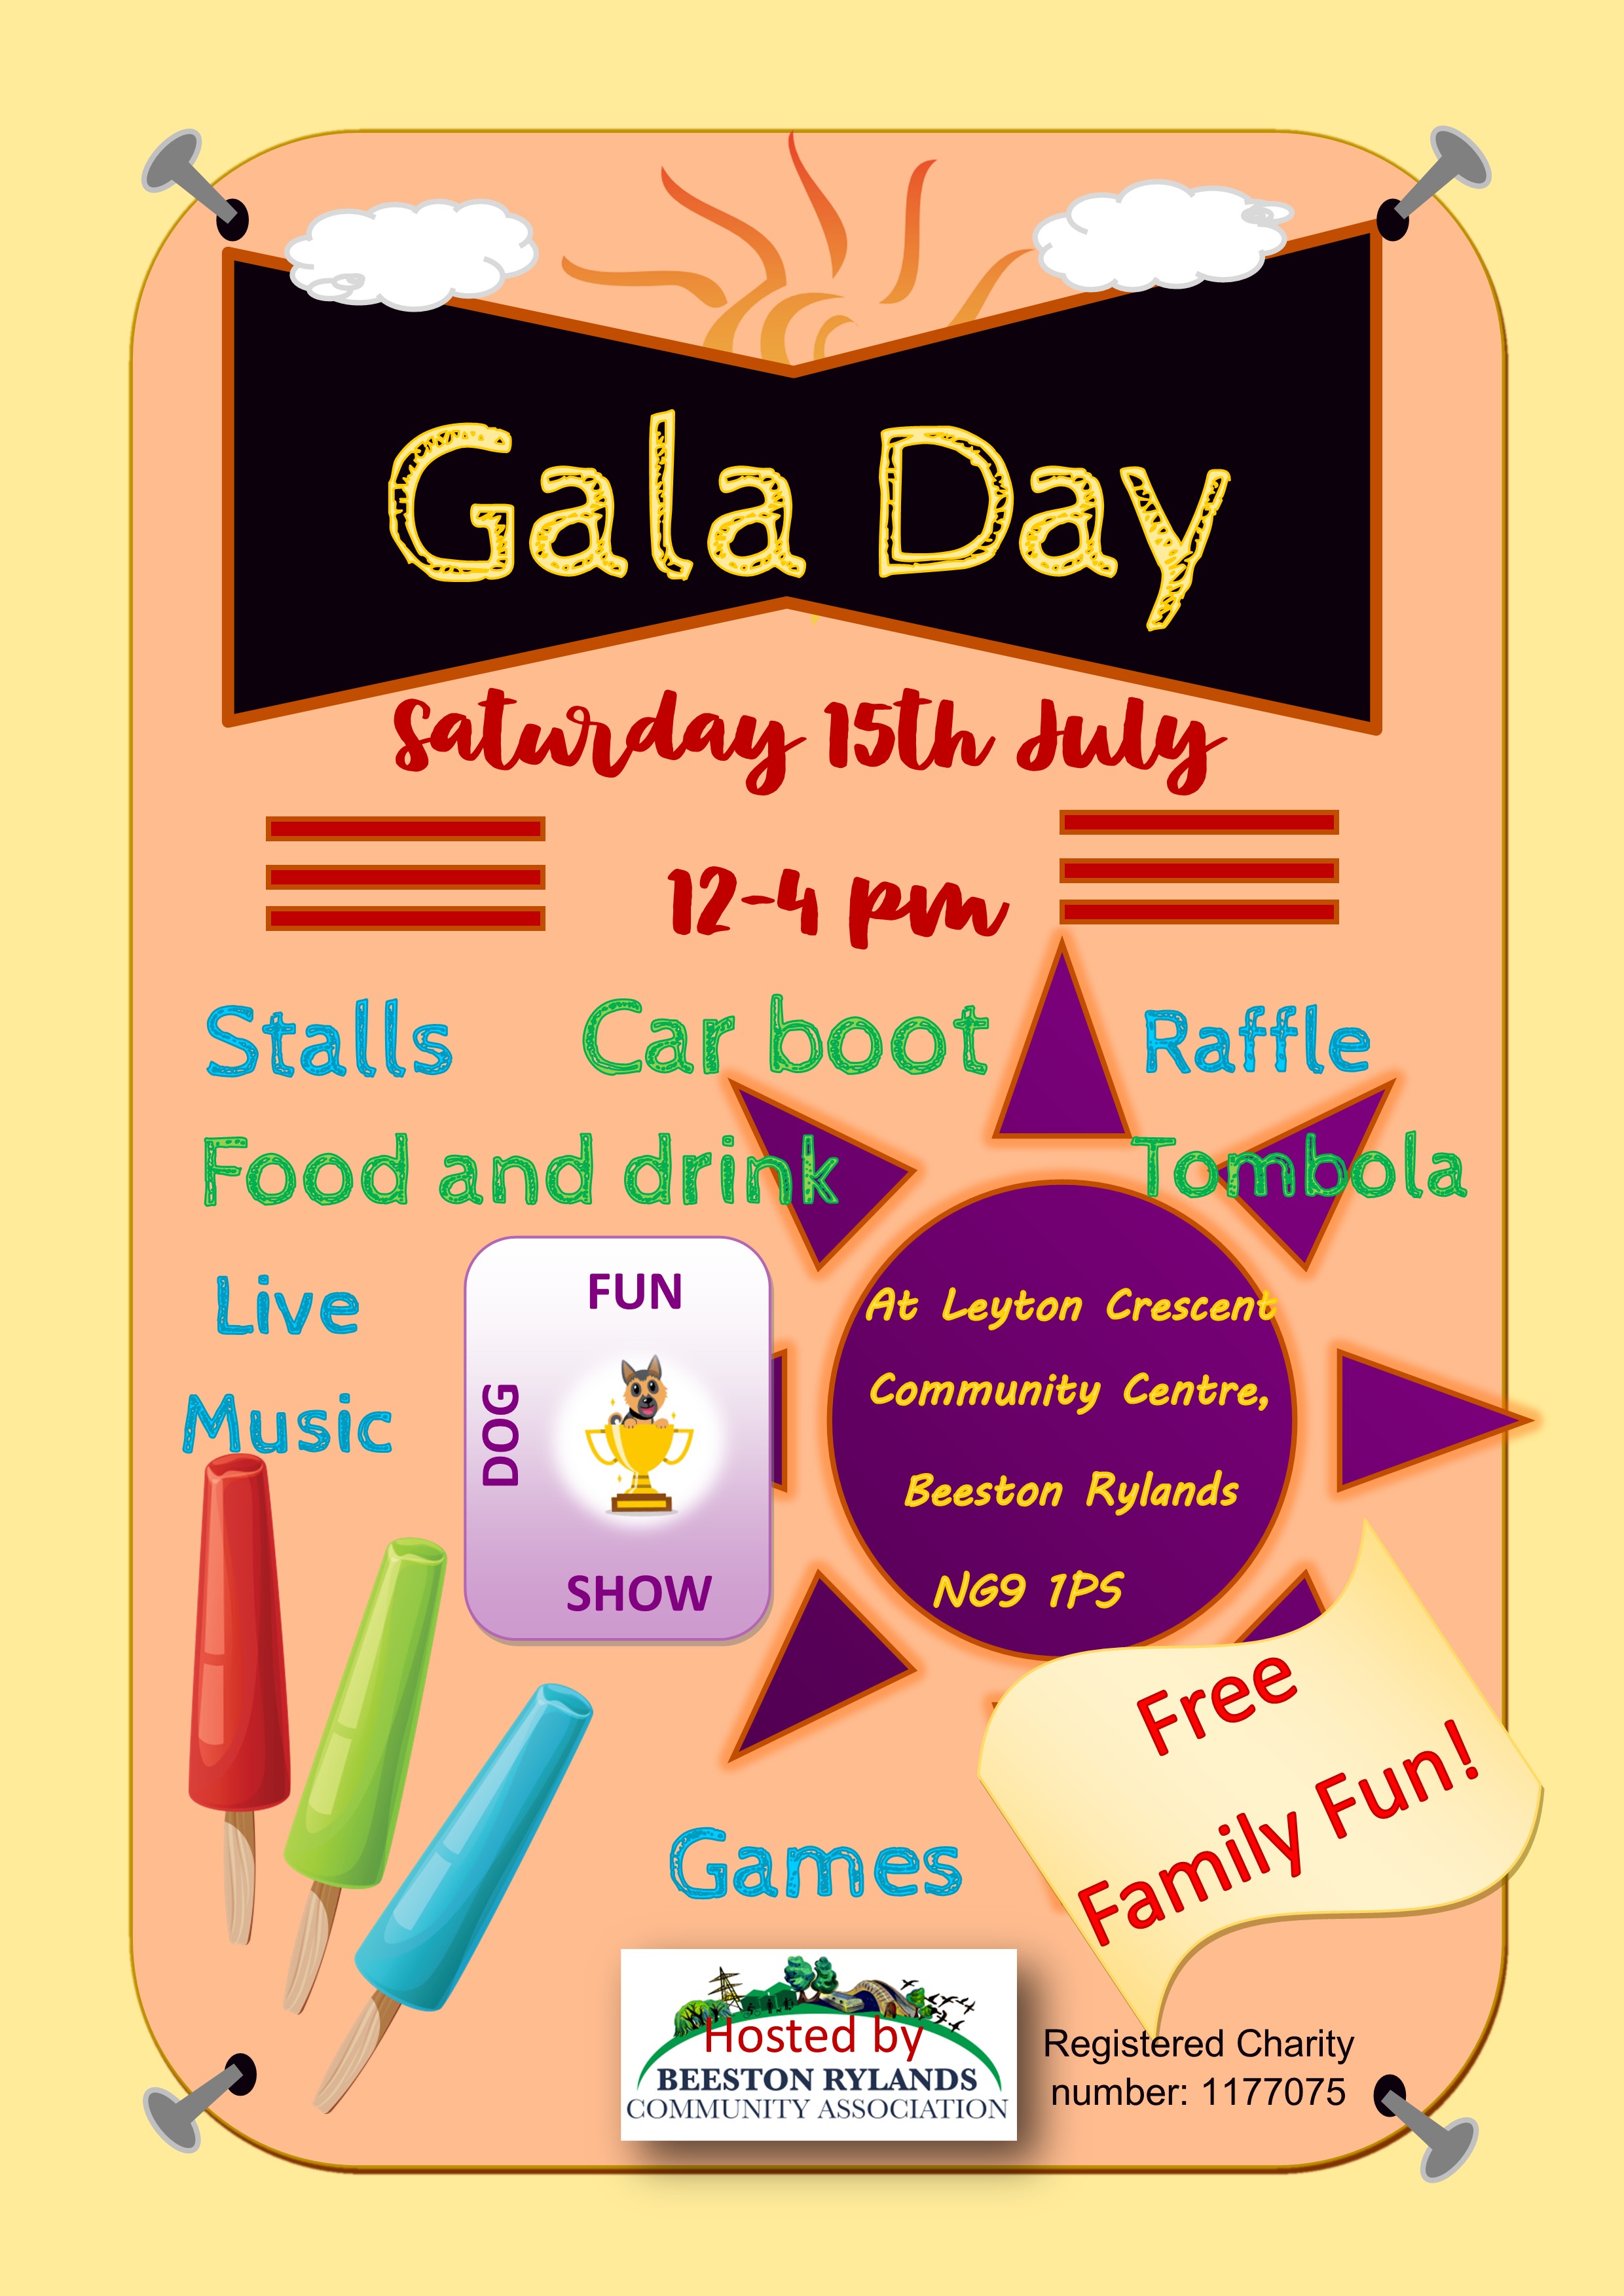 BRCA Summer Gala day event.